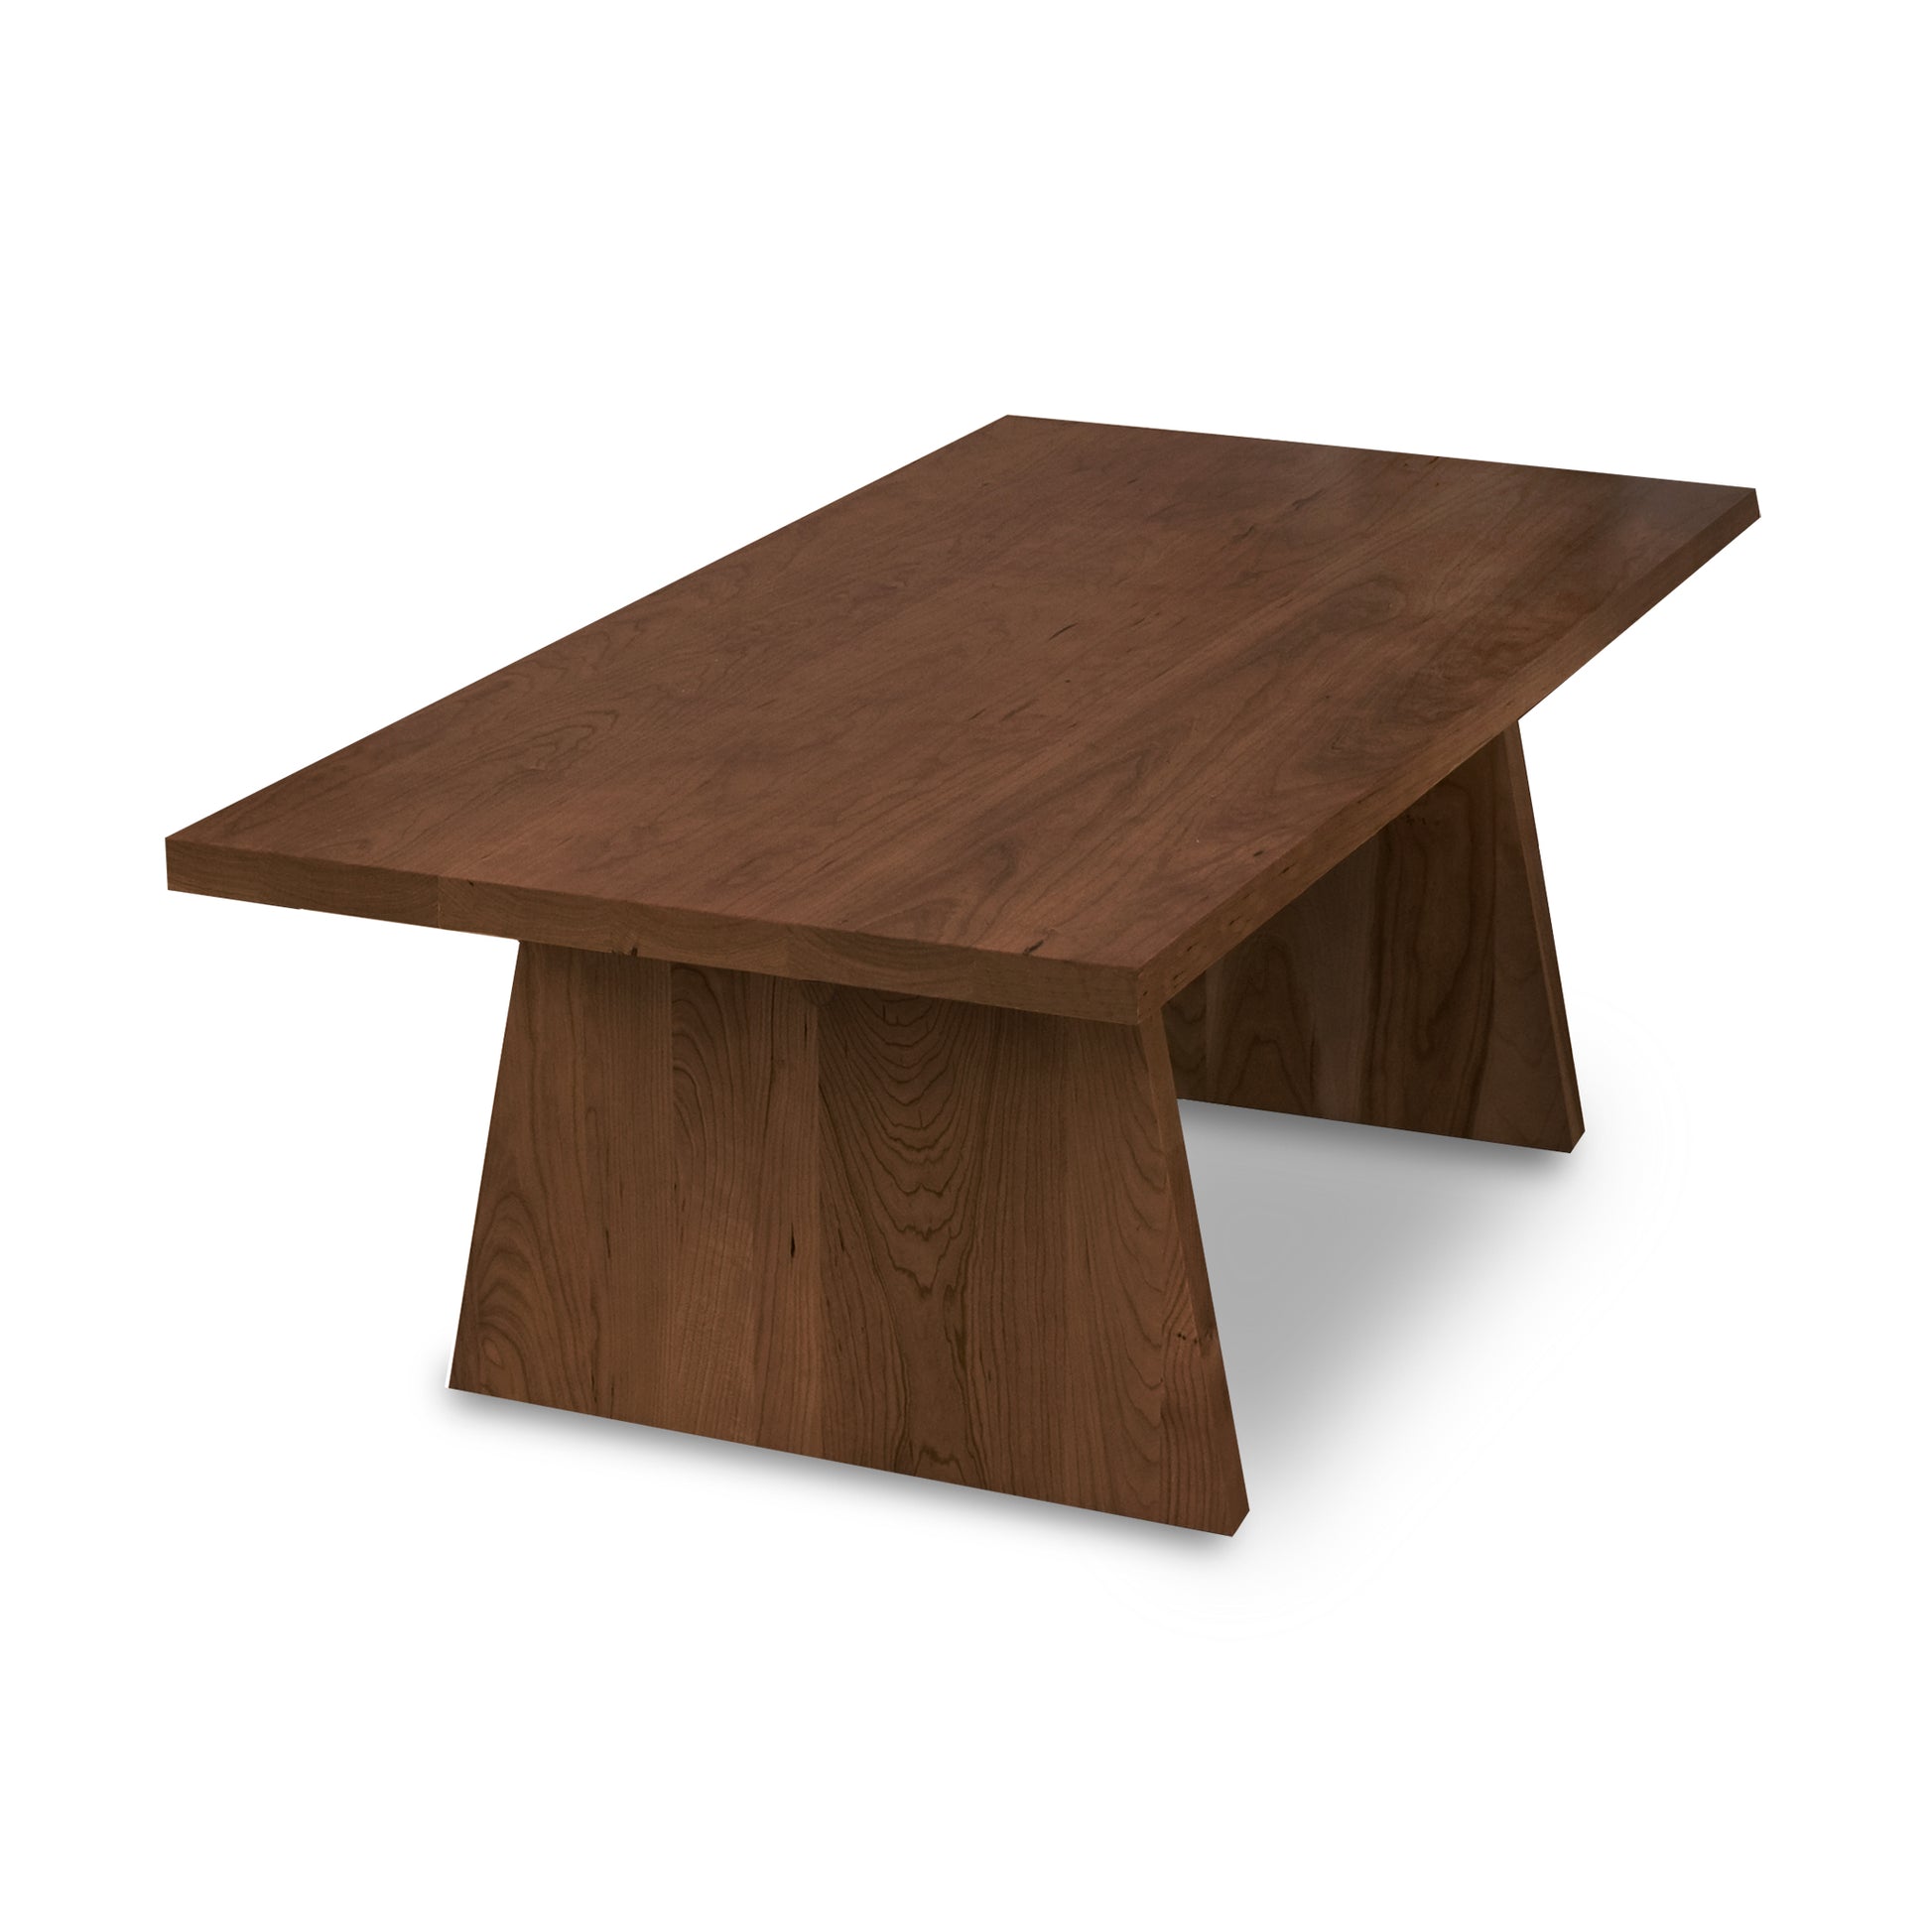 A rectangular Modern Designer Coffee Table with a Lyndon Furniture wooden base, sustainably harvested solid woods, and a natural finish.